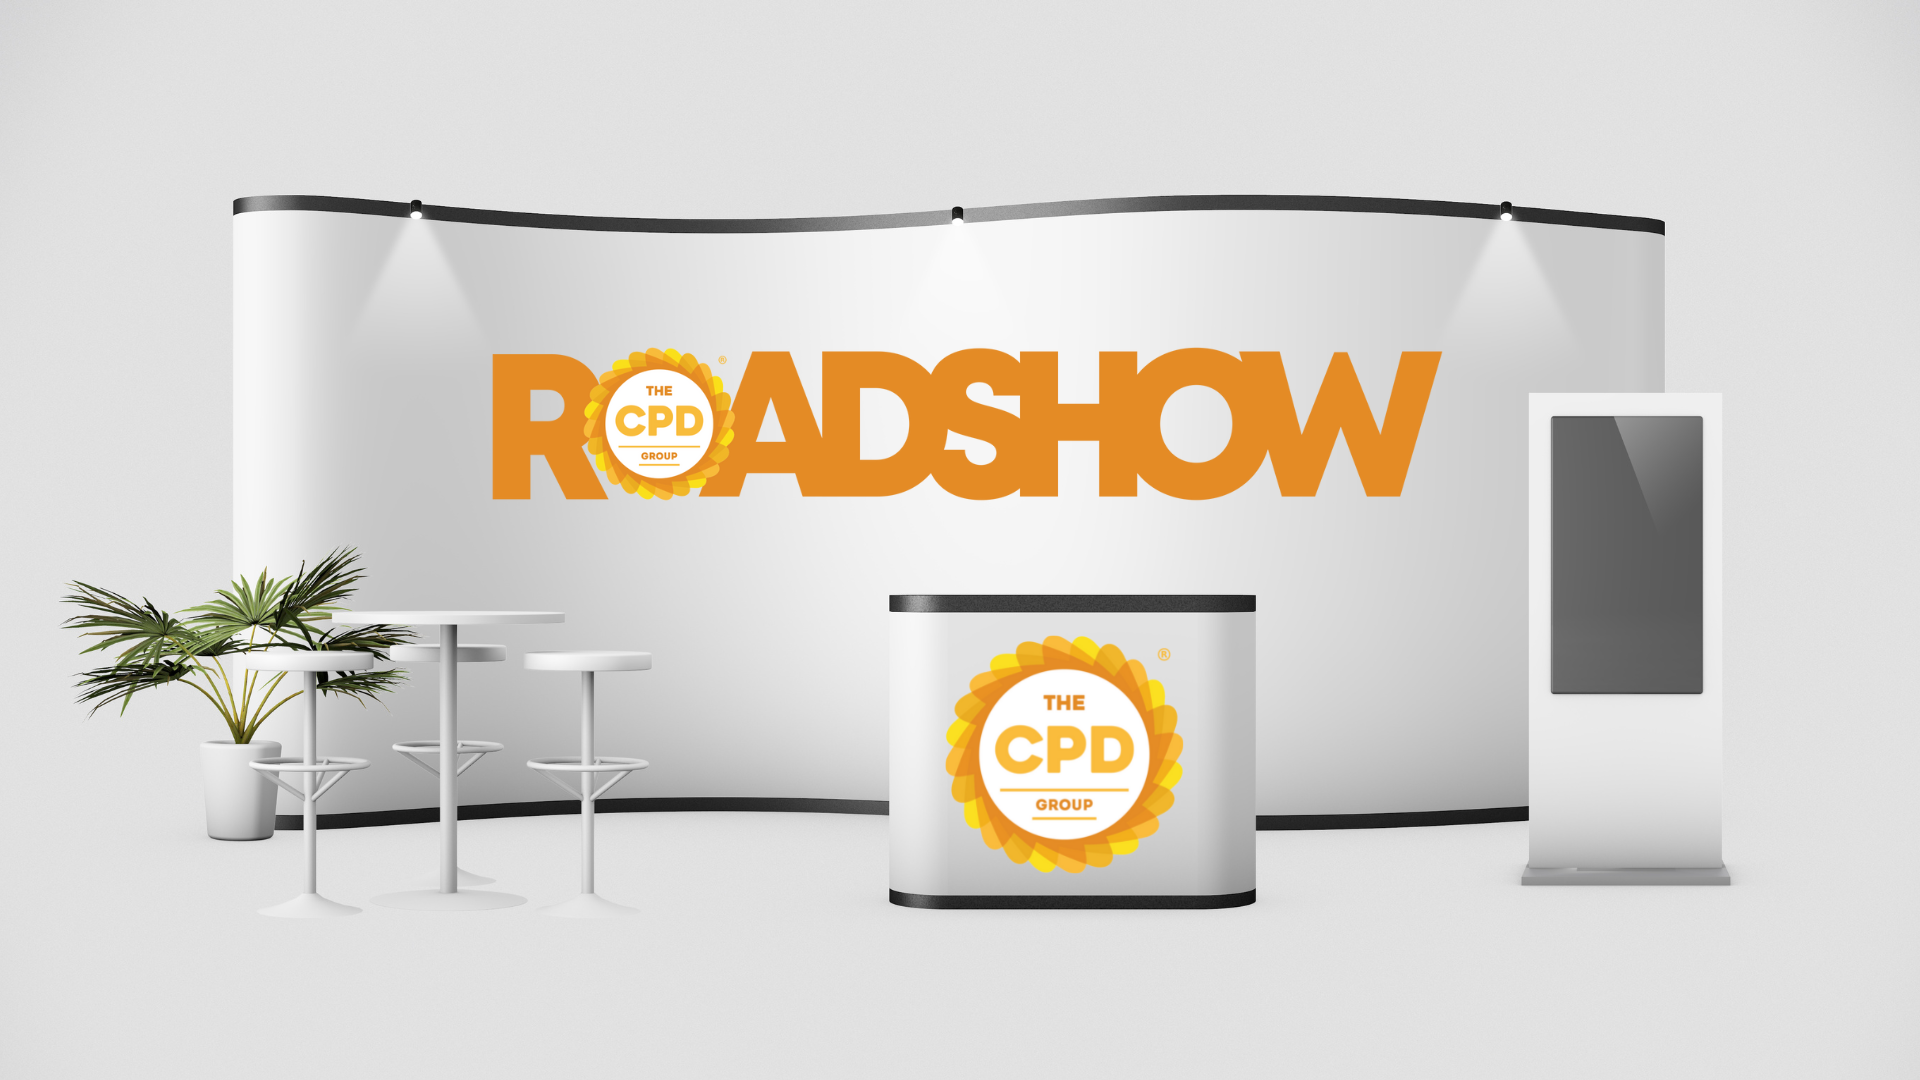 Grey exhibition stand featuring The CPD Group’sorangeRoadshow logo